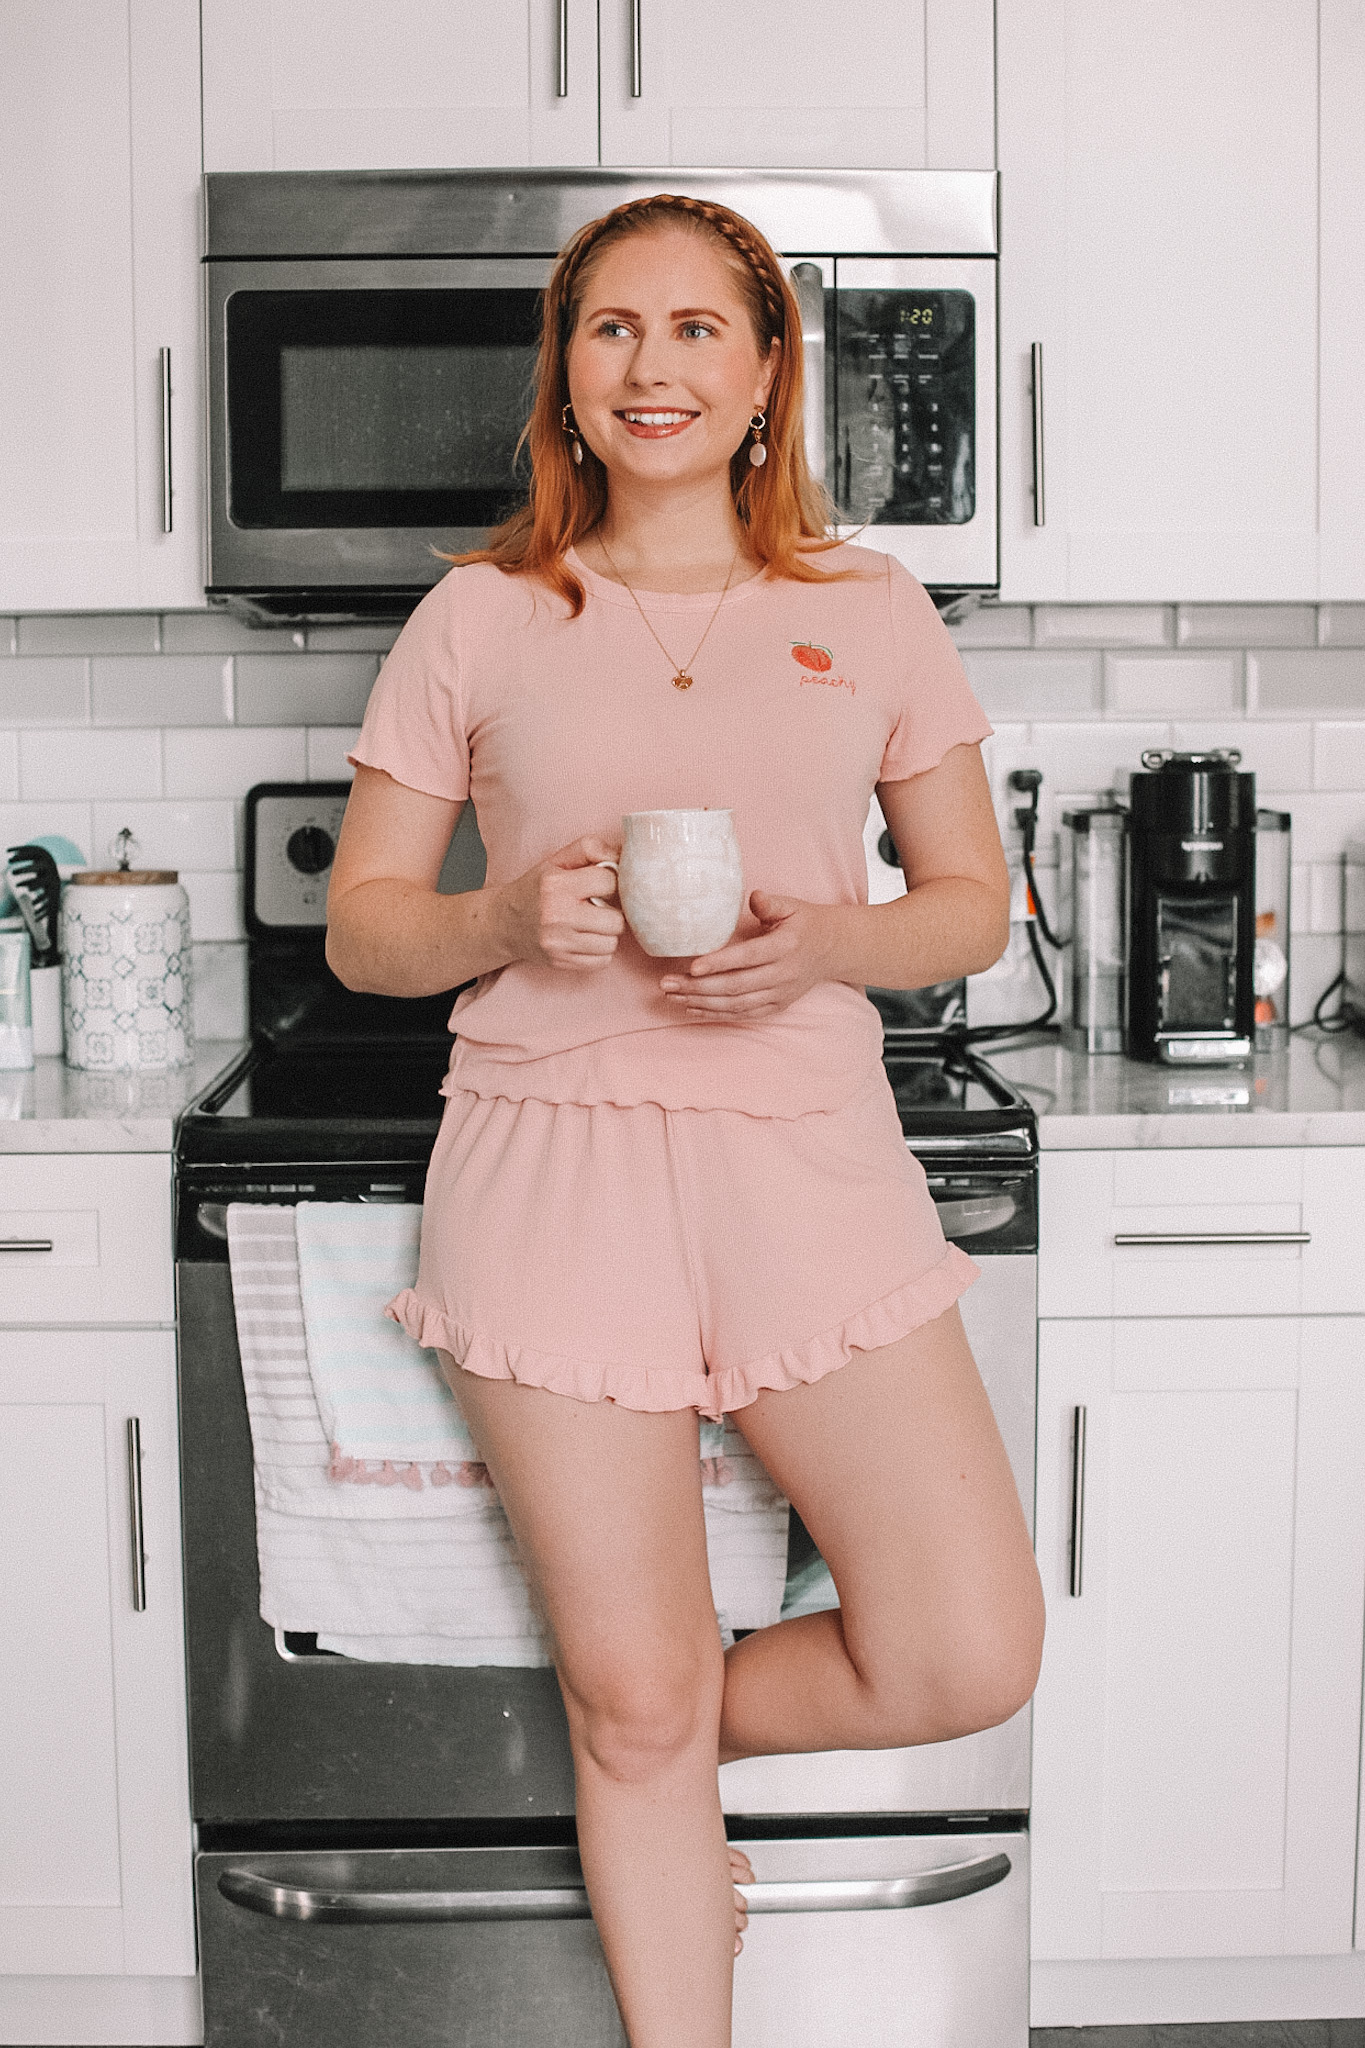 best coffee mugs from Anthropologie | nespresso vertuo reviews 2020 | Nespresso by De'Longhi ENV135B Coffee and Espresso Machine by De'Longhi | Affordable by Amanda | My Coffee Bar | Nespresso Vertuo Coffee and Espresso Machine by Breville with Aeroccino, Matte Black | What's On My Coffee Bar? Coffee Must-Haves by Amanda Burrows, Florida Style Blogger